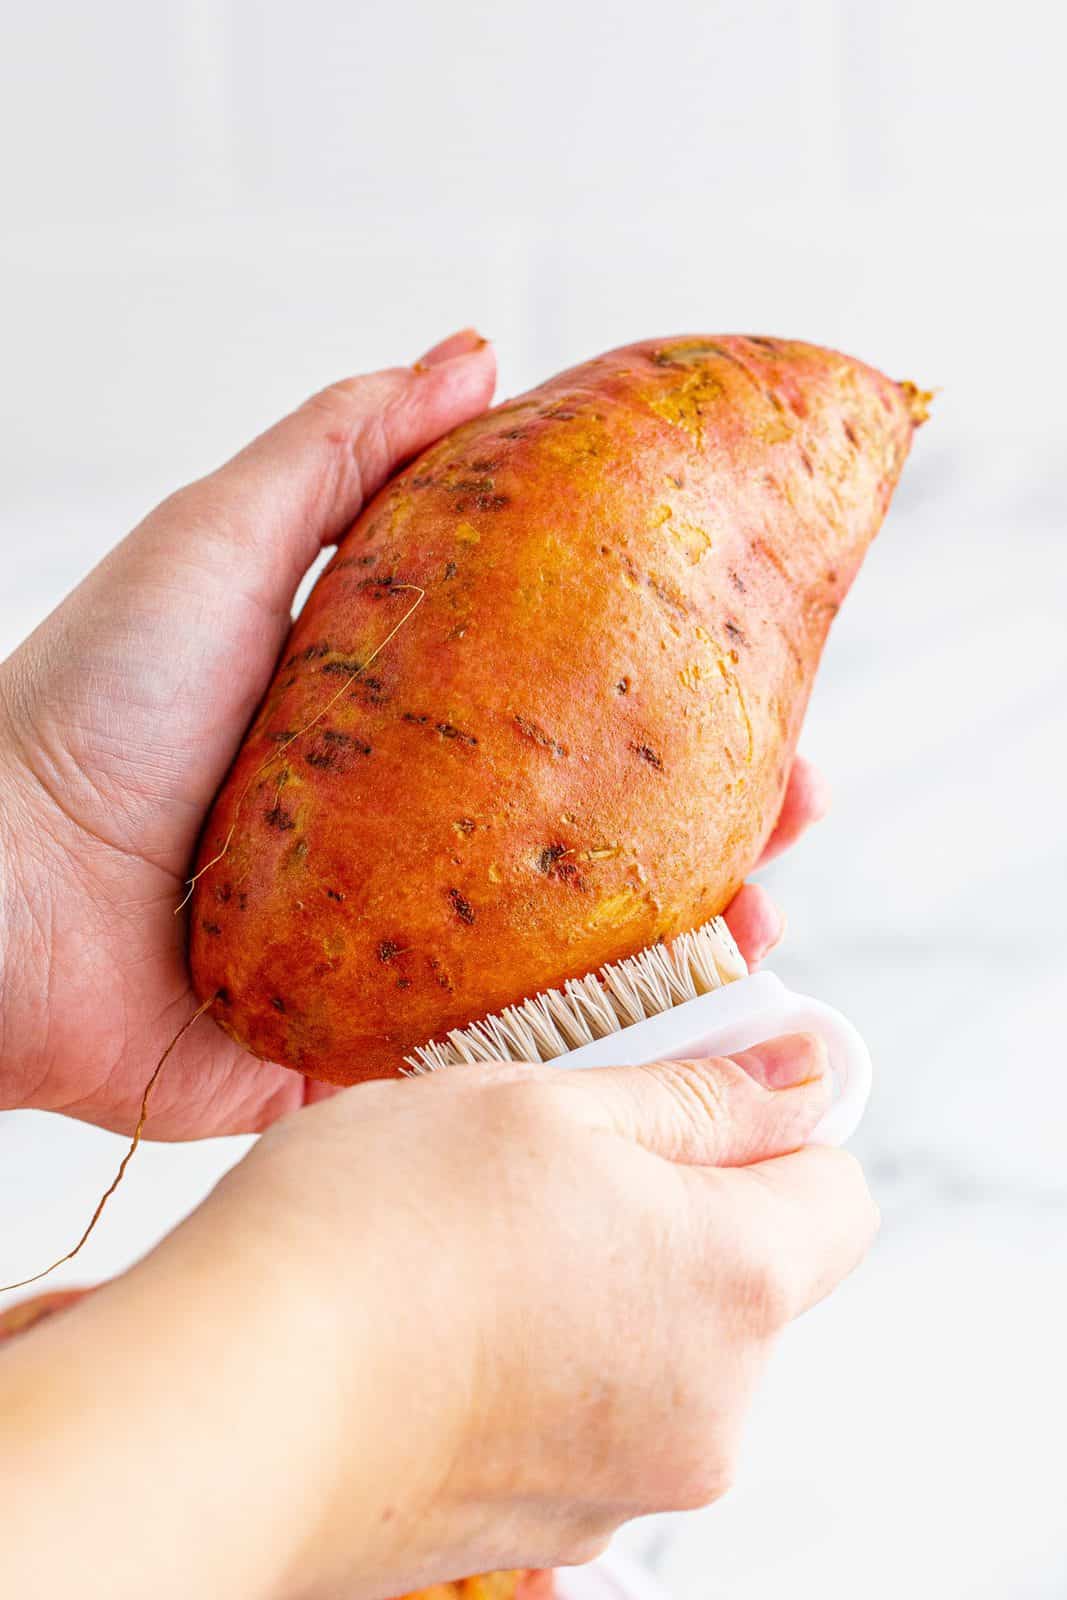 Hands scrubbing sweet potatoes with a vegetable scrubber.